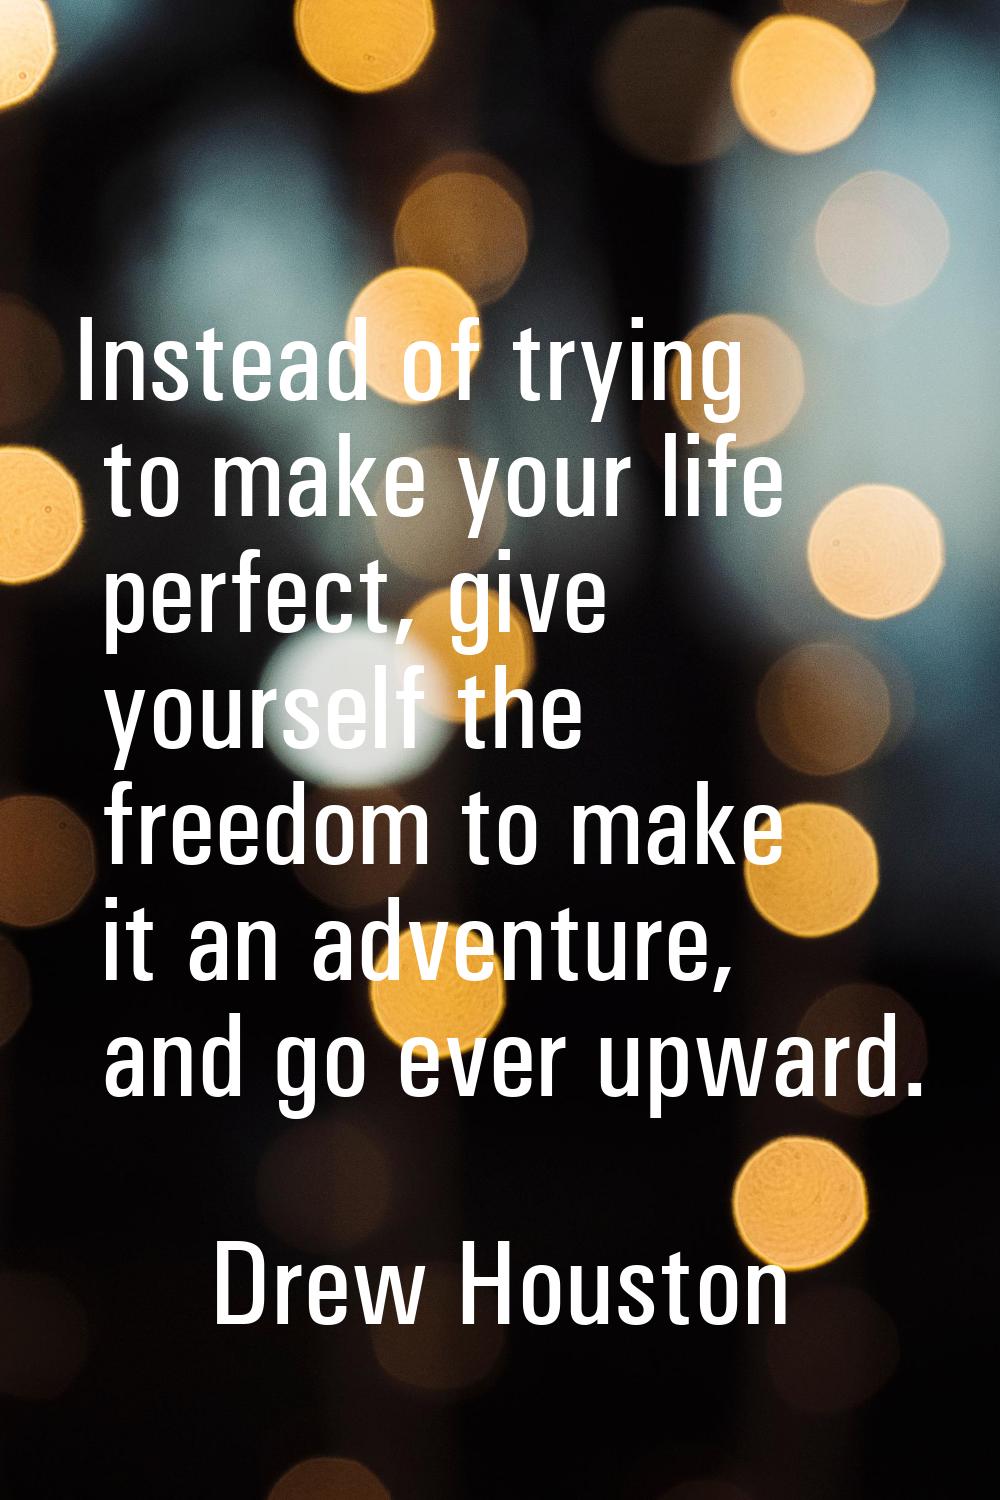 Instead of trying to make your life perfect, give yourself the freedom to make it an adventure, and